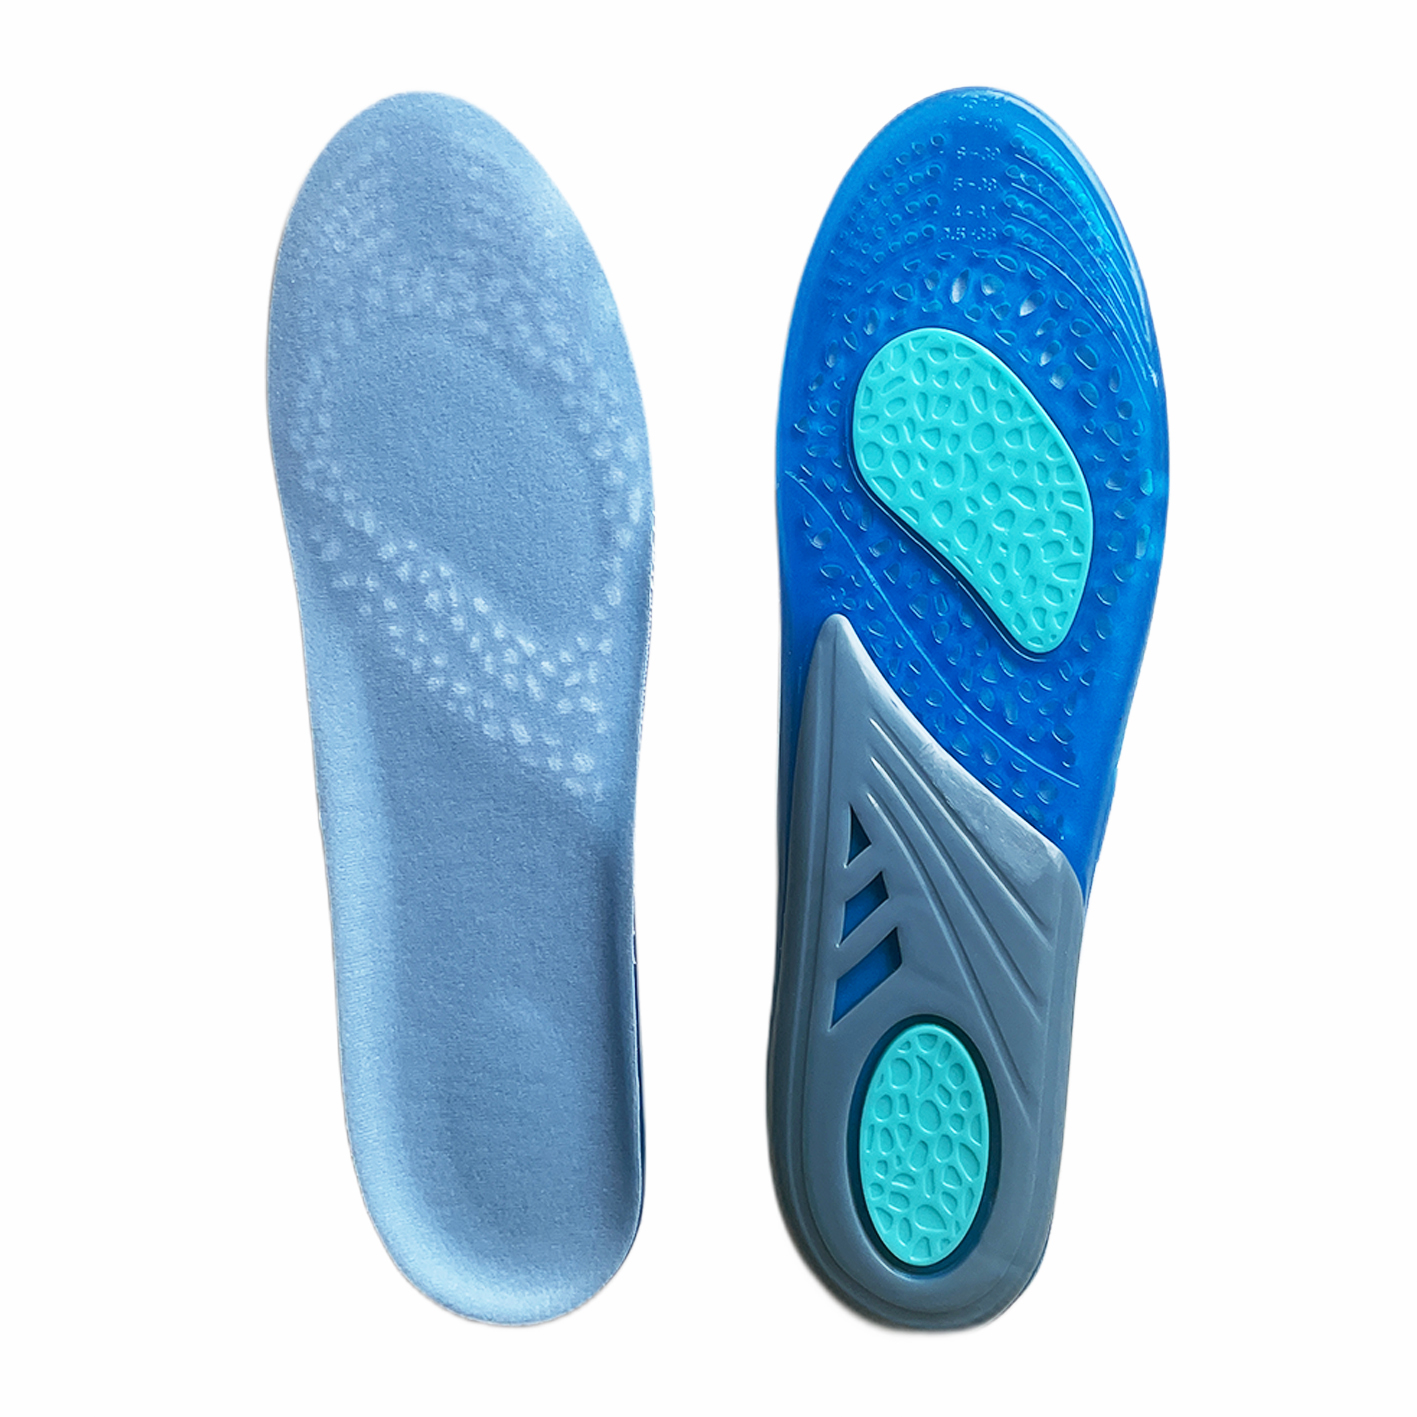 Sports Massaging Silicone Gel Insoles Running Insoles For shoes Featured Image